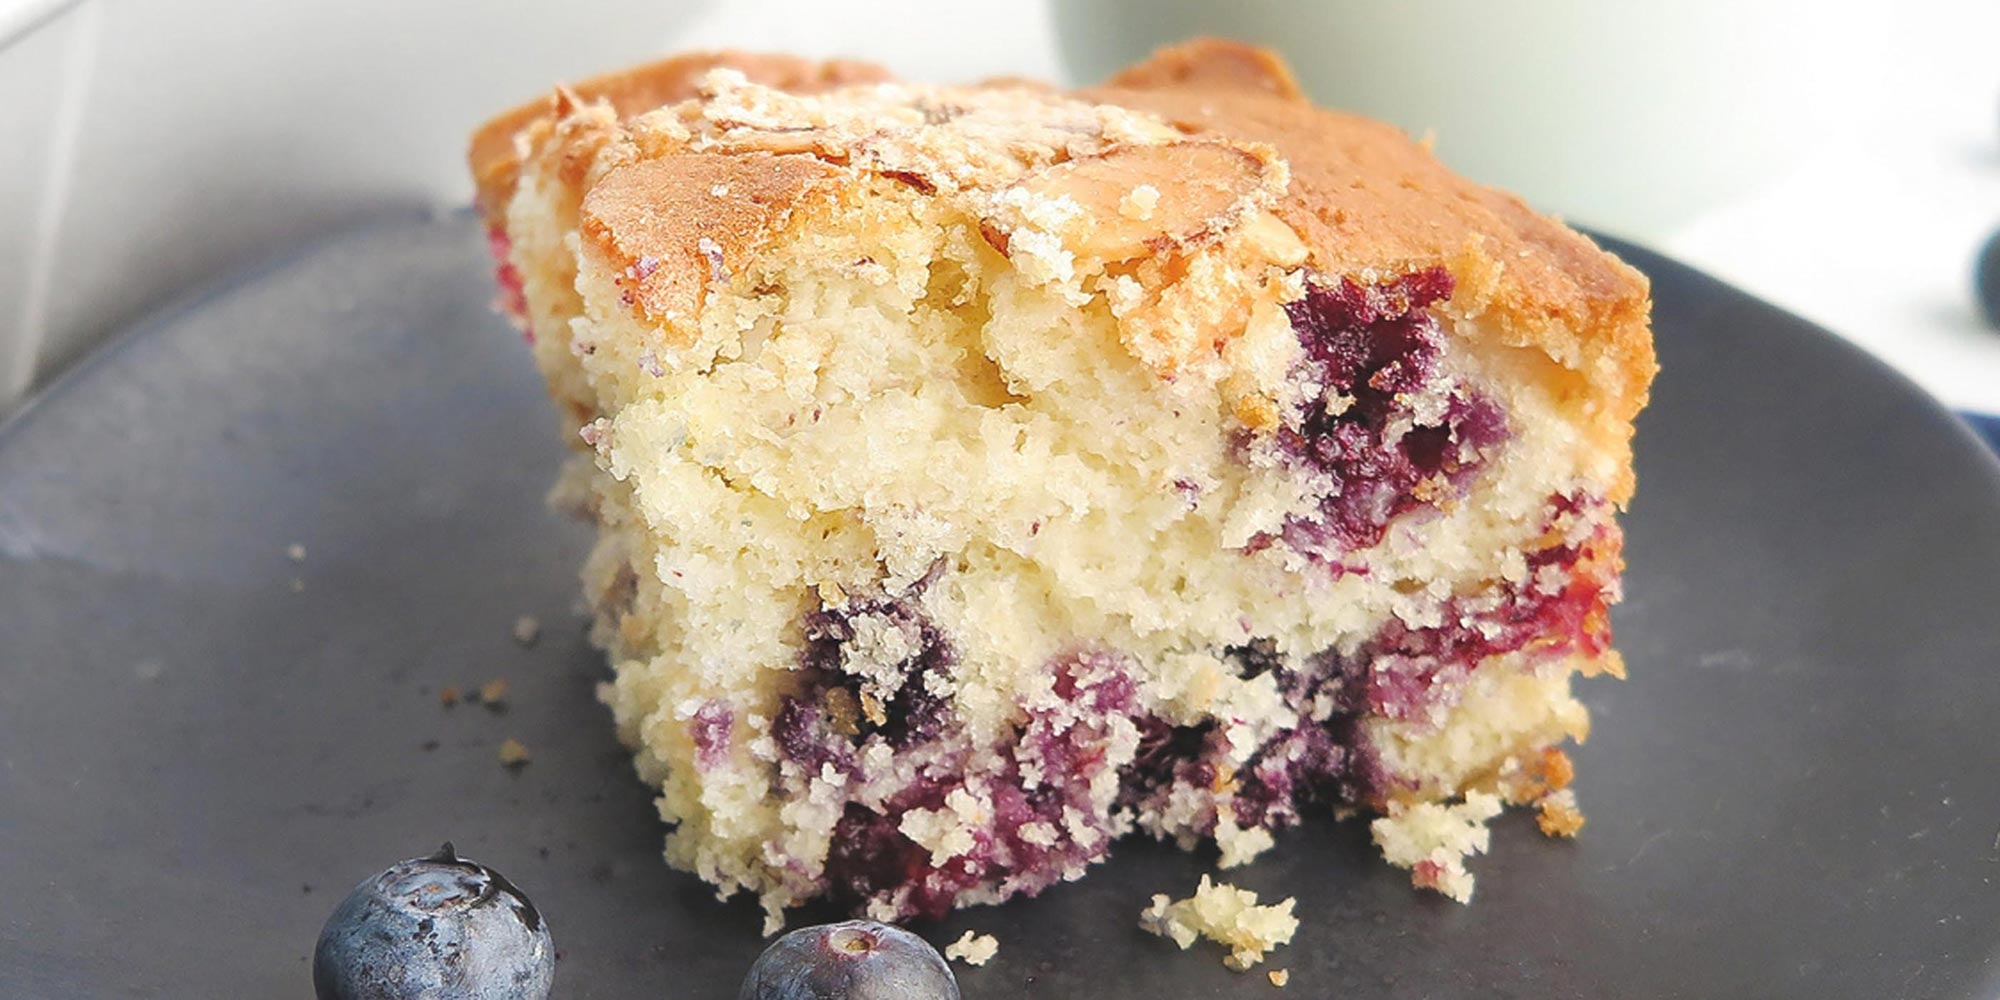 Almond-Blueberry Coffee Cake - Bake from Scratch